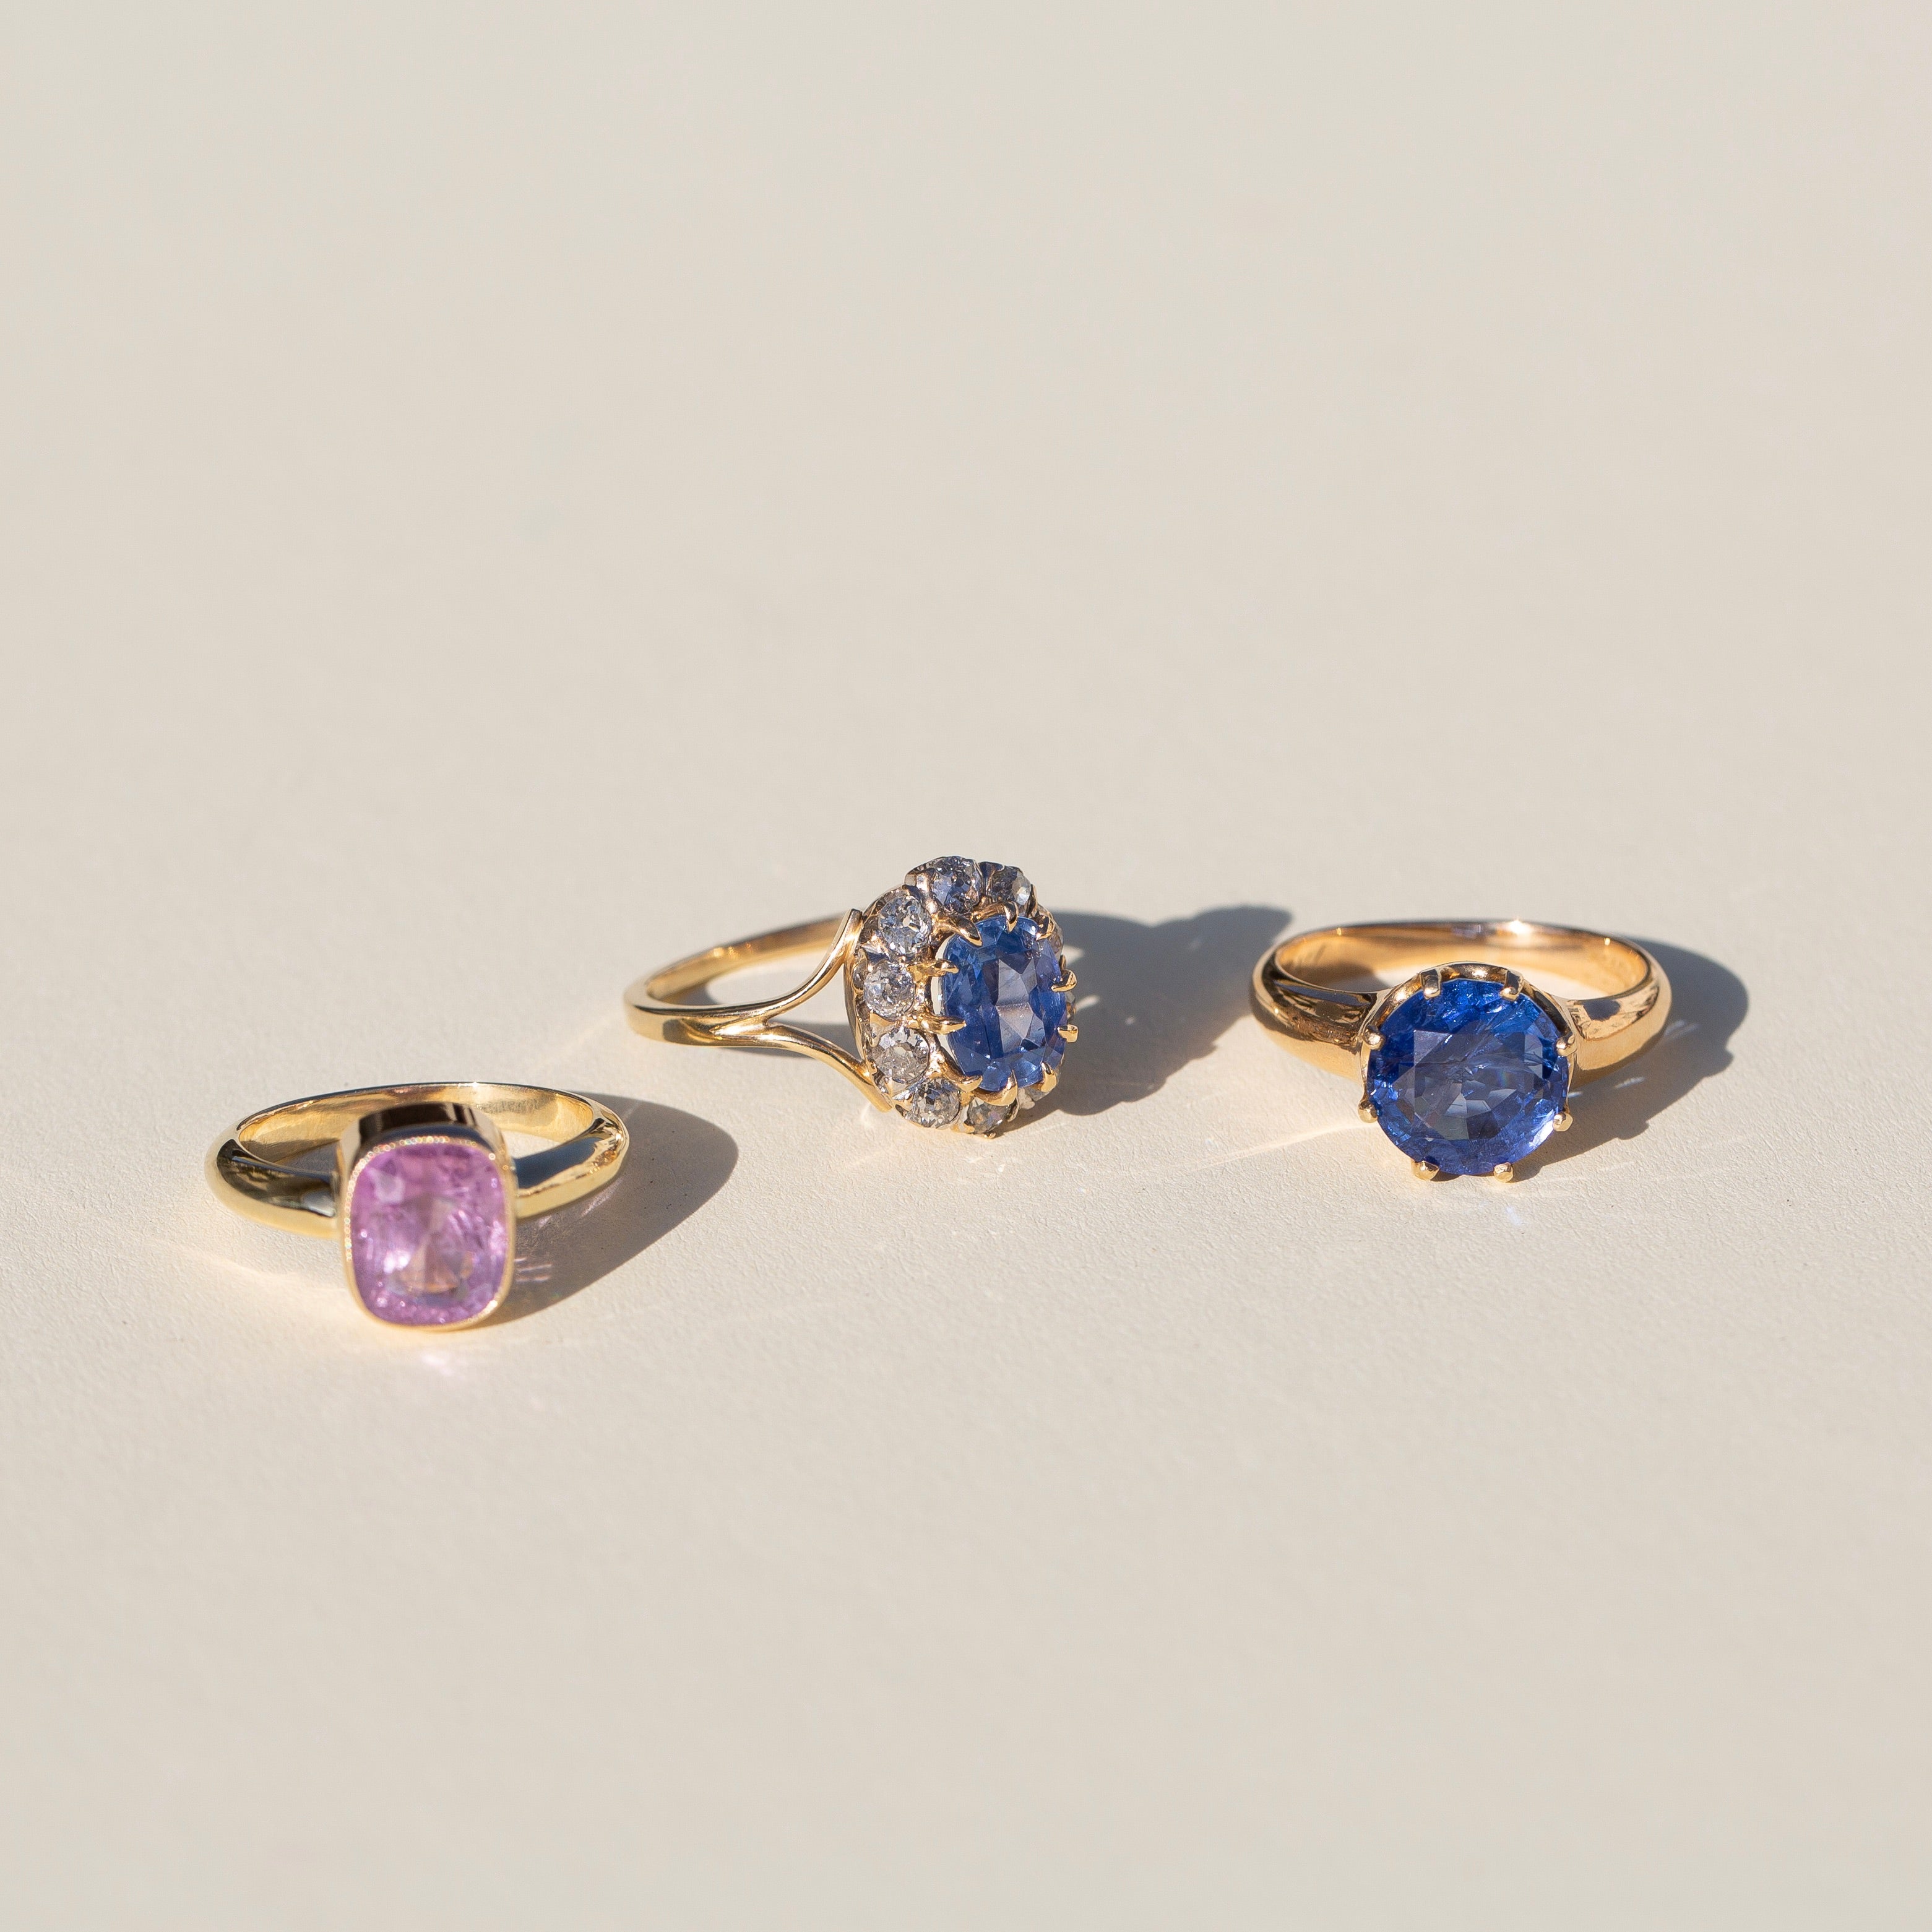 Victorian 2.37 Carat Sapphire, Diamond, And 14k Gold Cluster Ring